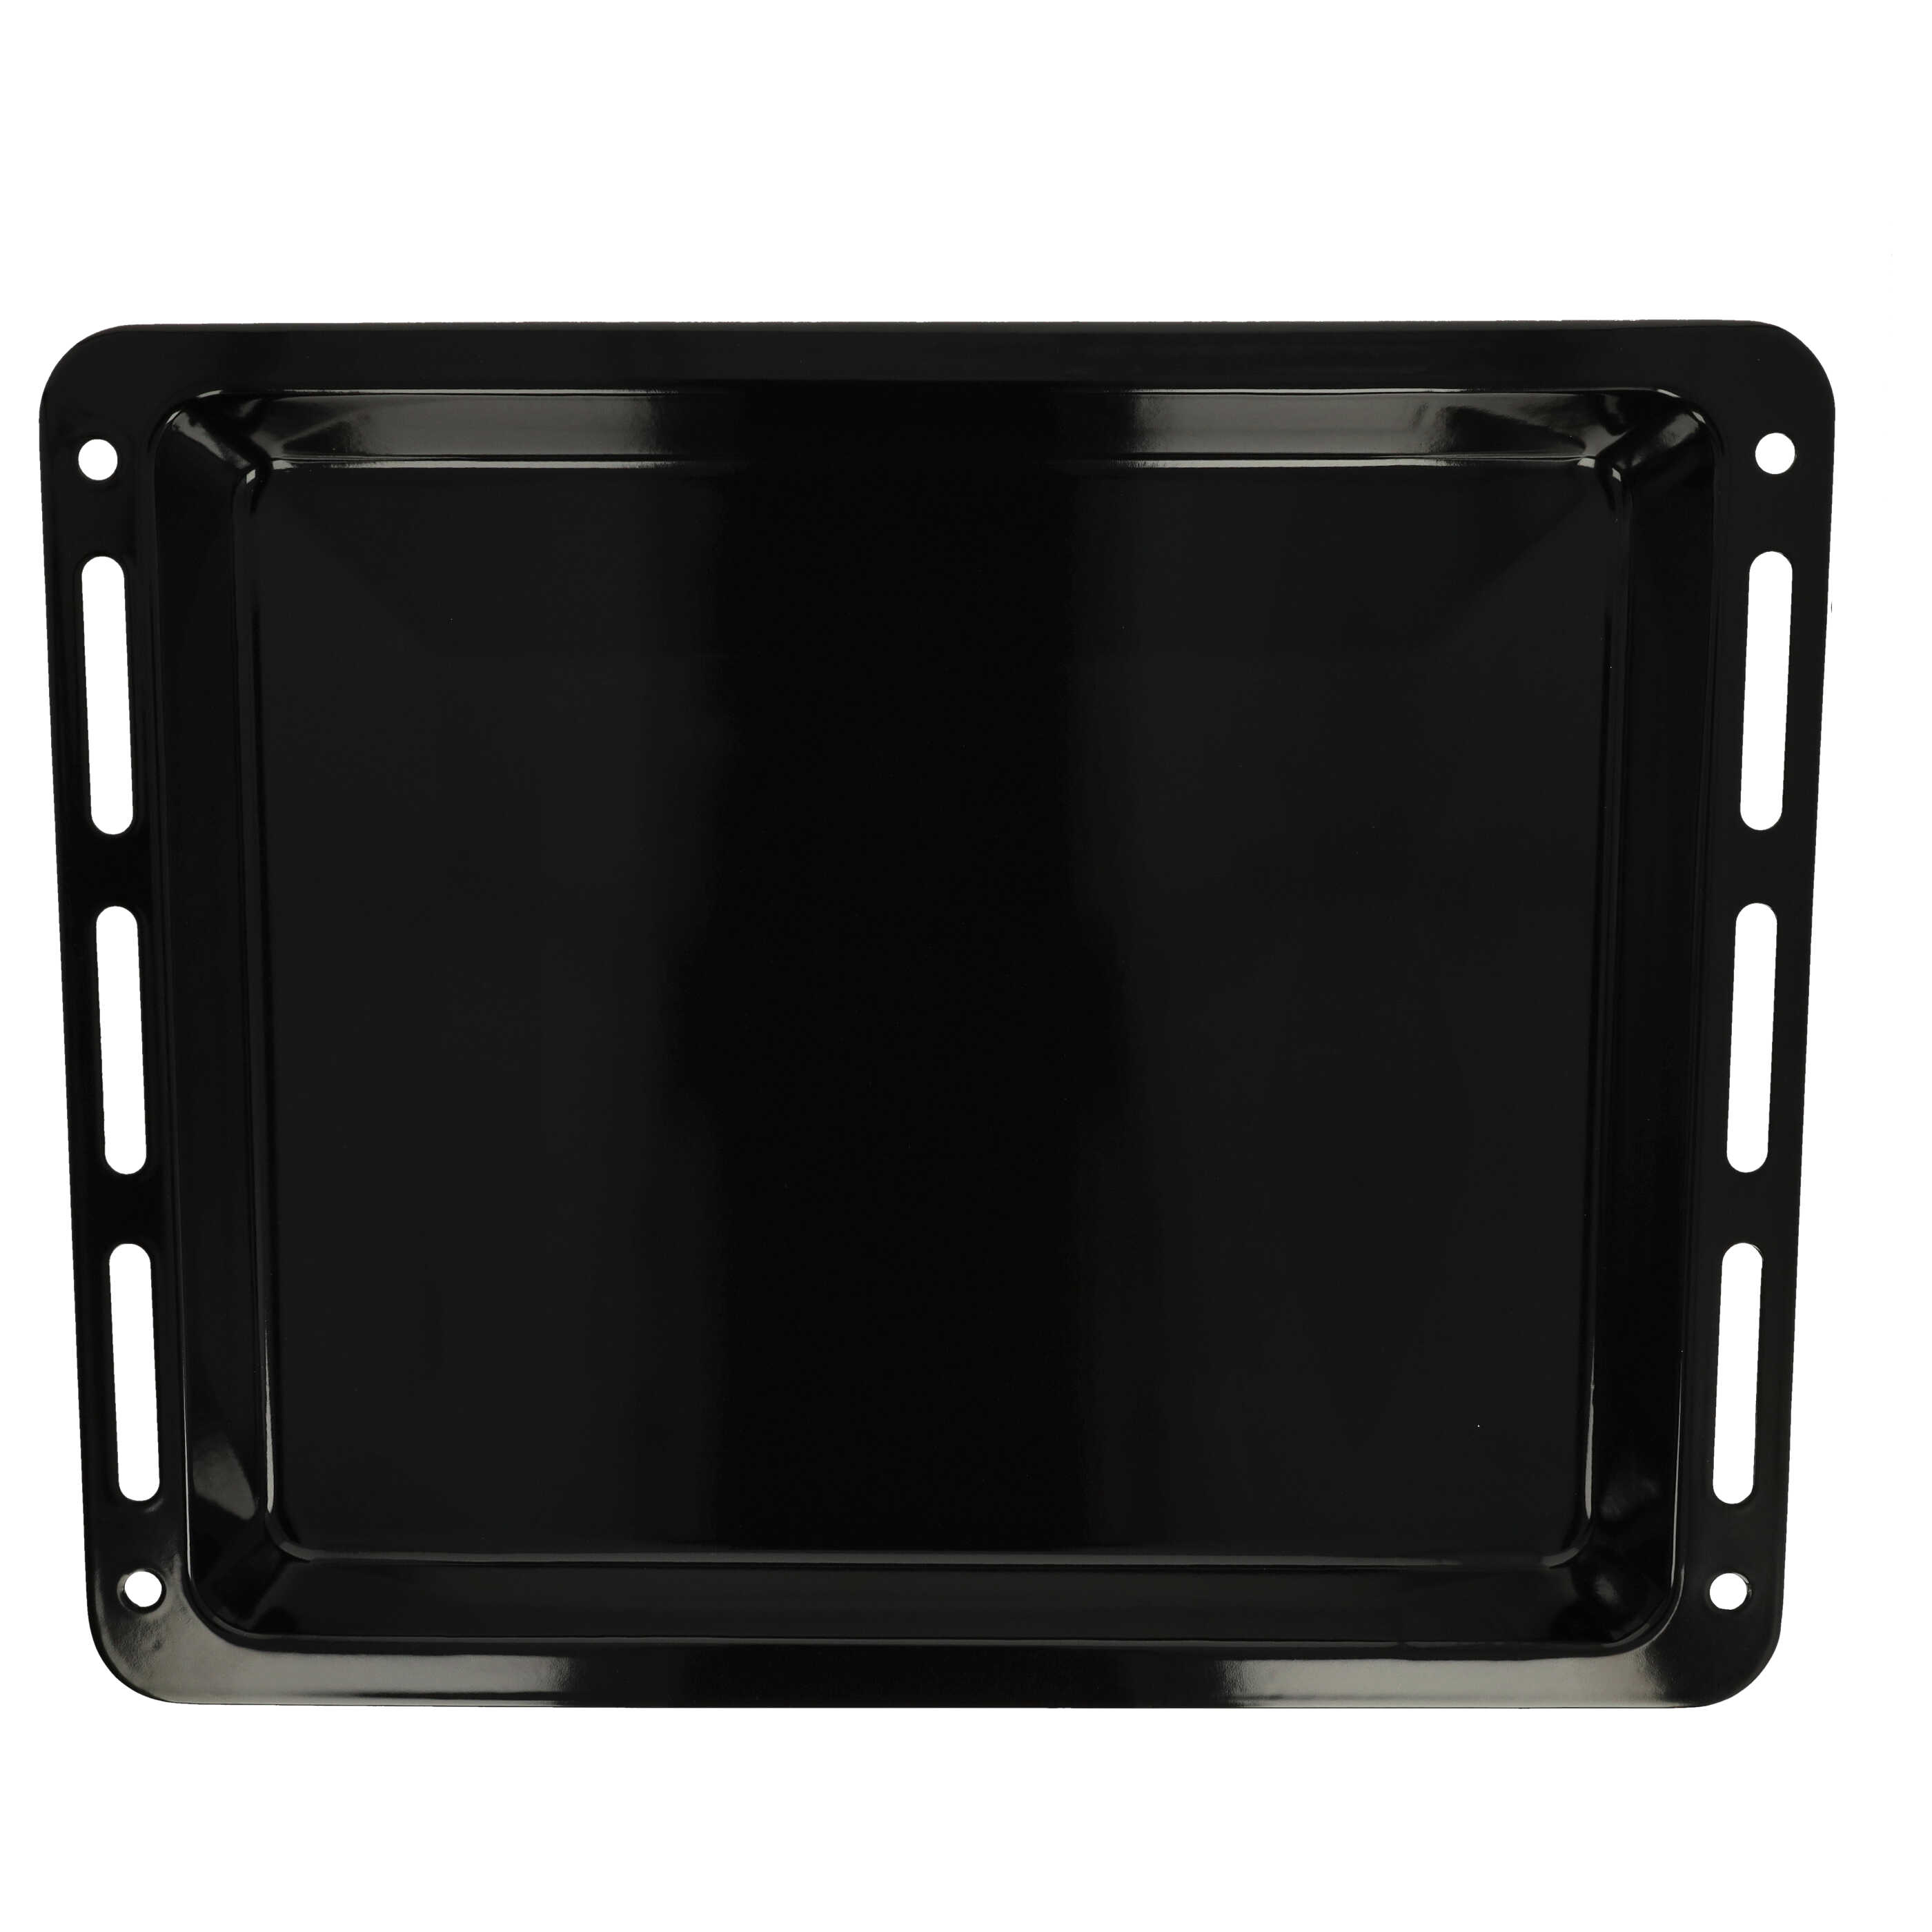 Baking Tray as Replacement for Bosch 434176, 00742635, 00662999, 435847, 434178 Oven - 44.5 x 37.5 x 4.4 cm